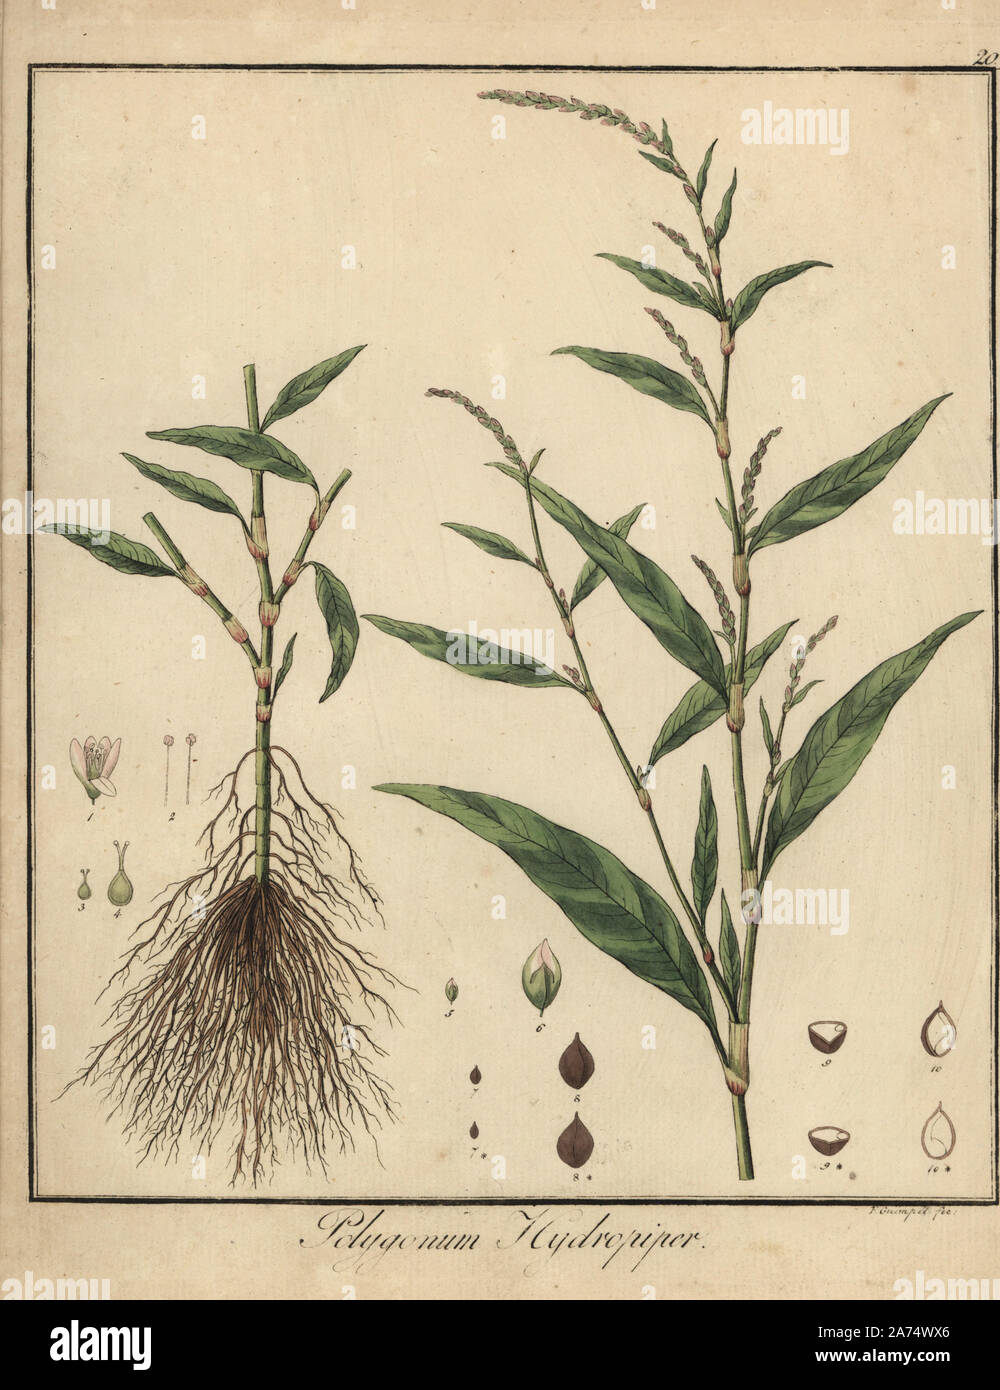 Water pepper, Persicaria hydropiper. Handcoloured copperplate engraving by F. Guimpel from Dr. Friedrich Gottlob Hayne's Medical Botany, Berlin, 1822. Hayne (1763-1832) was a German botanist, apothecary and professor of pharmaceutical botany at Berlin University. Stock Photo